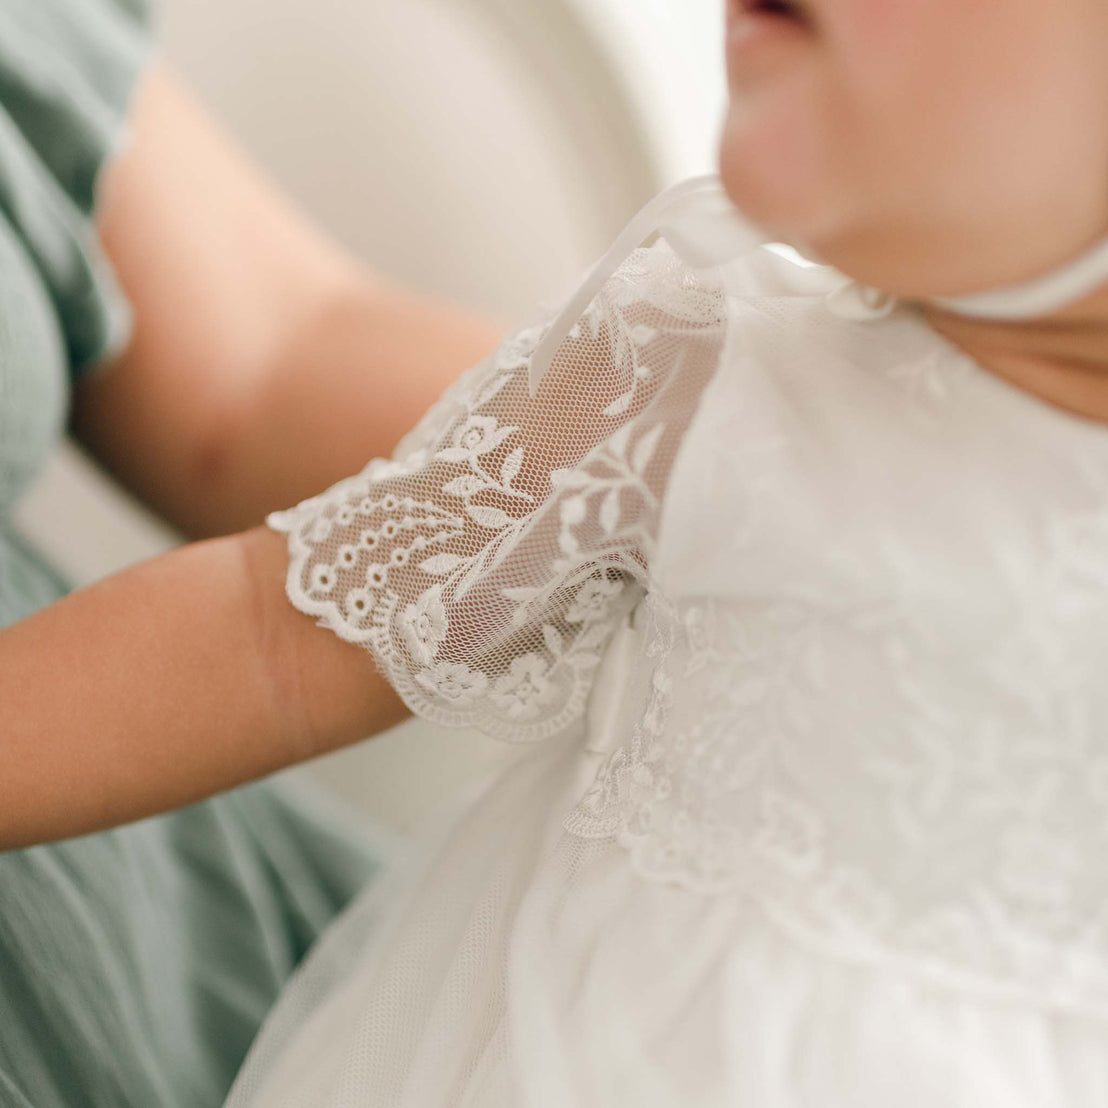 A close-up photo of a baby in an Ella Christening Gown, featuring detailed floral embroidered netting lace sleeves. The intricate lace pattern on the dress sleeve is clearly visible. An adult in a green dress is holding the baby. 